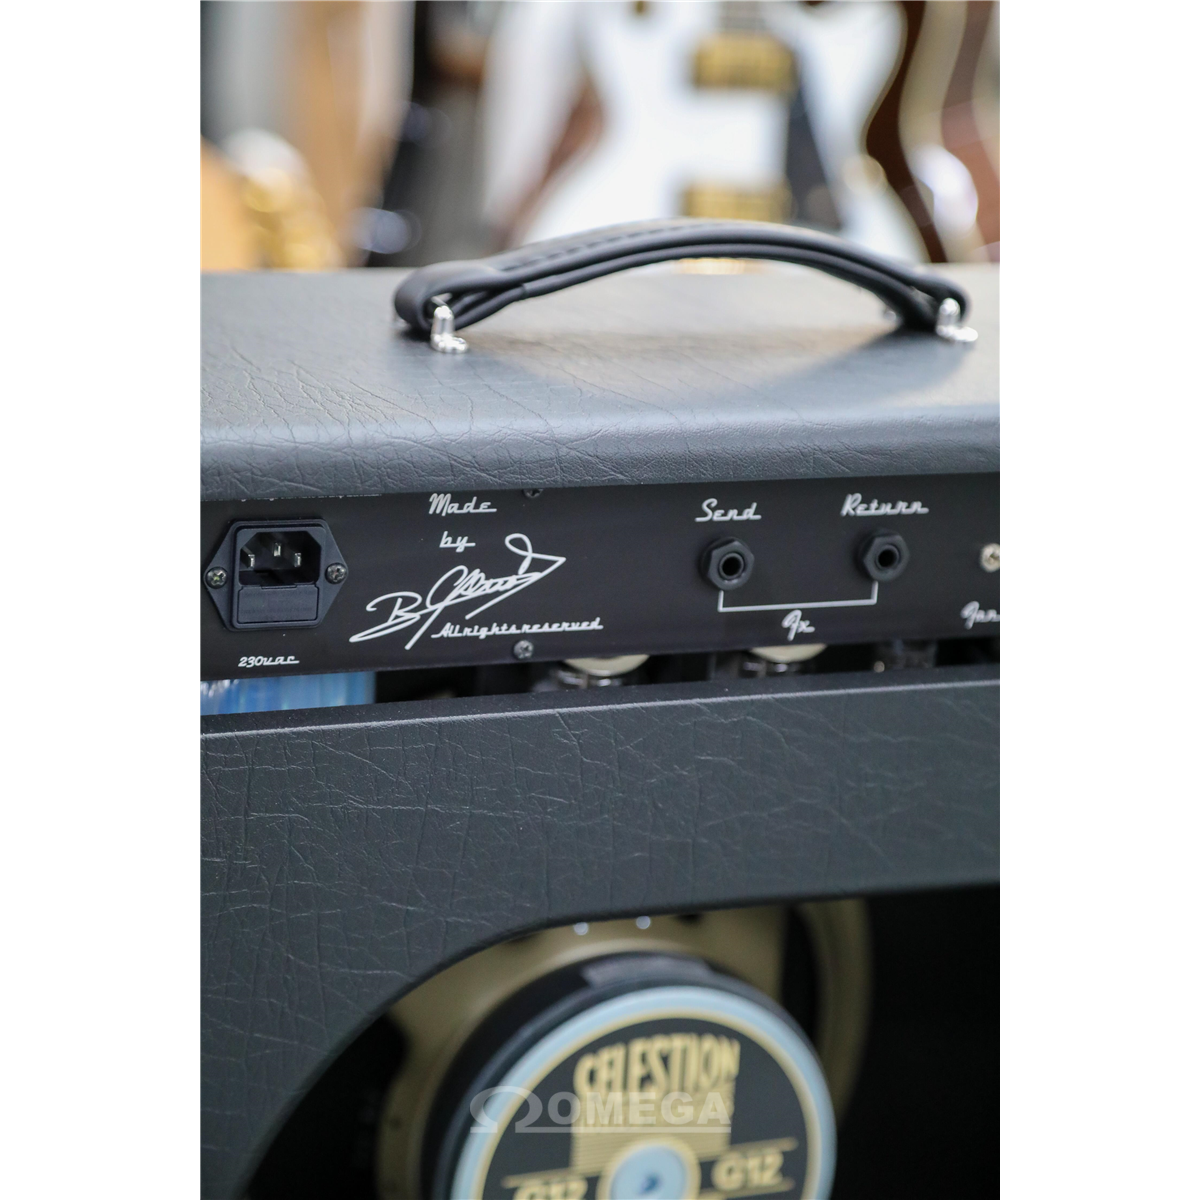 AMS Amplifiers The One 50 Combo Black